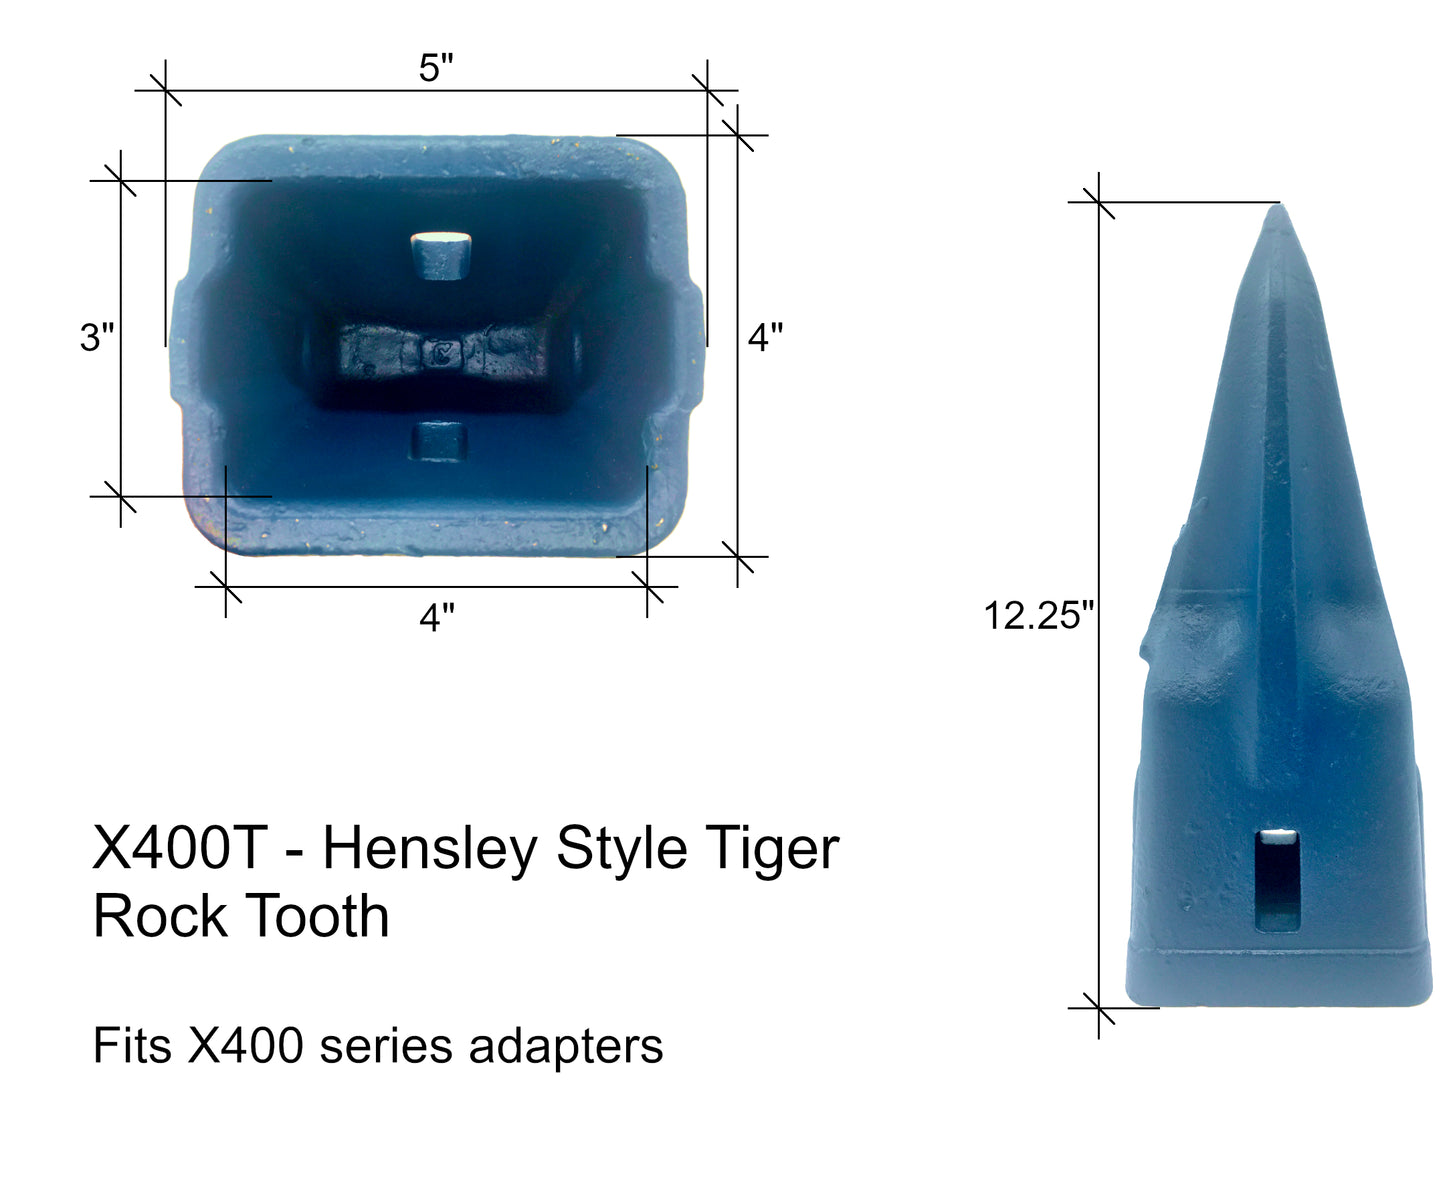 X400T Single Tiger Rock Tooth - 'Hensley X400 Style' for Excavator Buckets